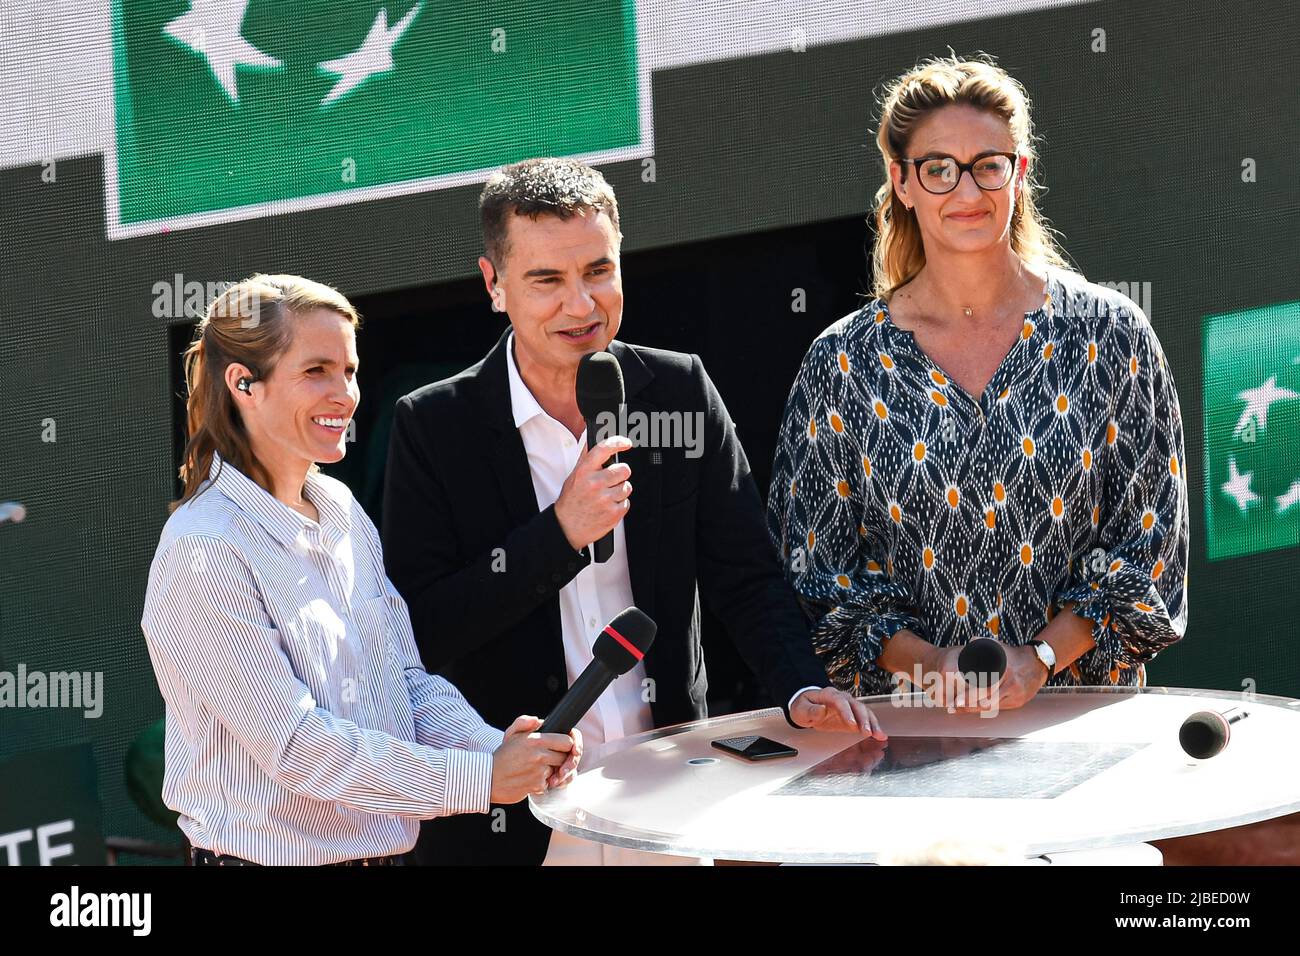 Paris, France - 05/06/2022, The French television channel 'France Televisions' ('France TV Sport', 'France 2') with Justine Henin, Laurent Luyat and Mary Pierce after the French Open final, Grand Slam tennis tournament on June 5, 2022 at Roland-Garros stadium in Paris, France - Photo Victor Joly / DPPI Stock Photo